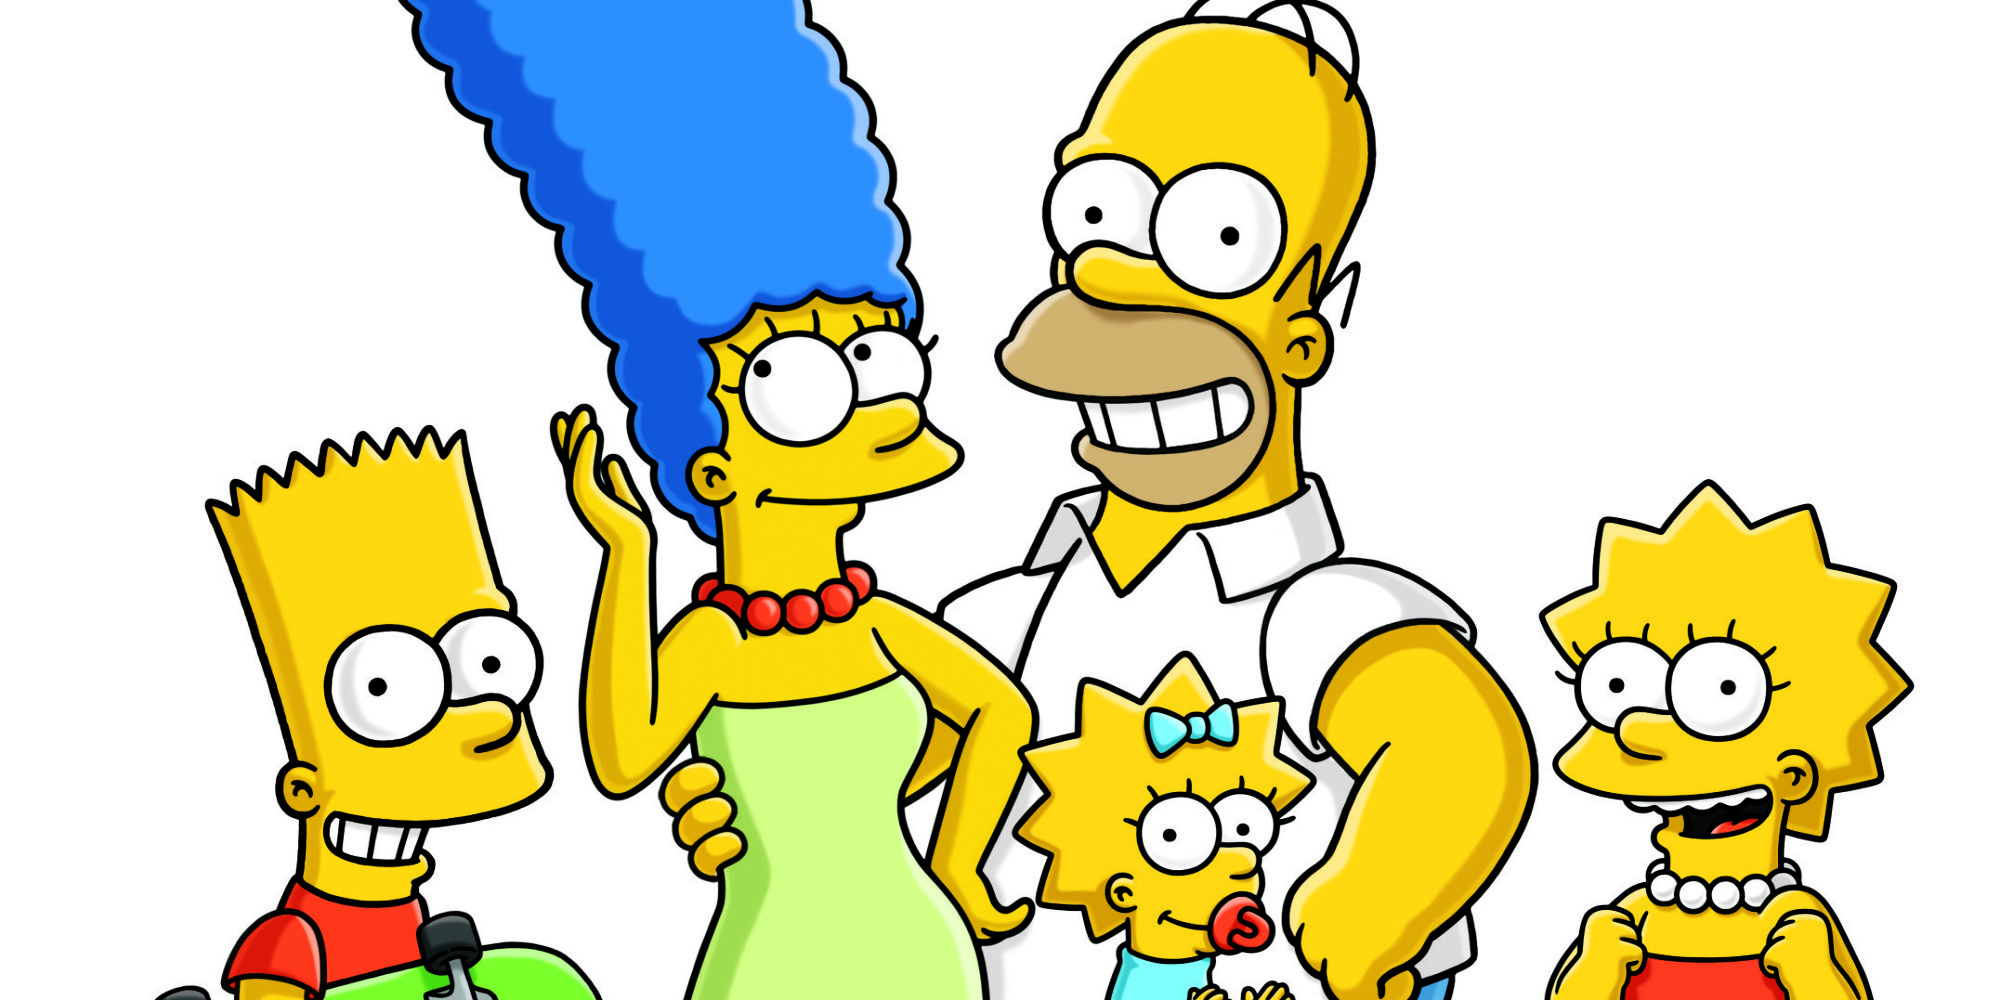 The Simpsons #6